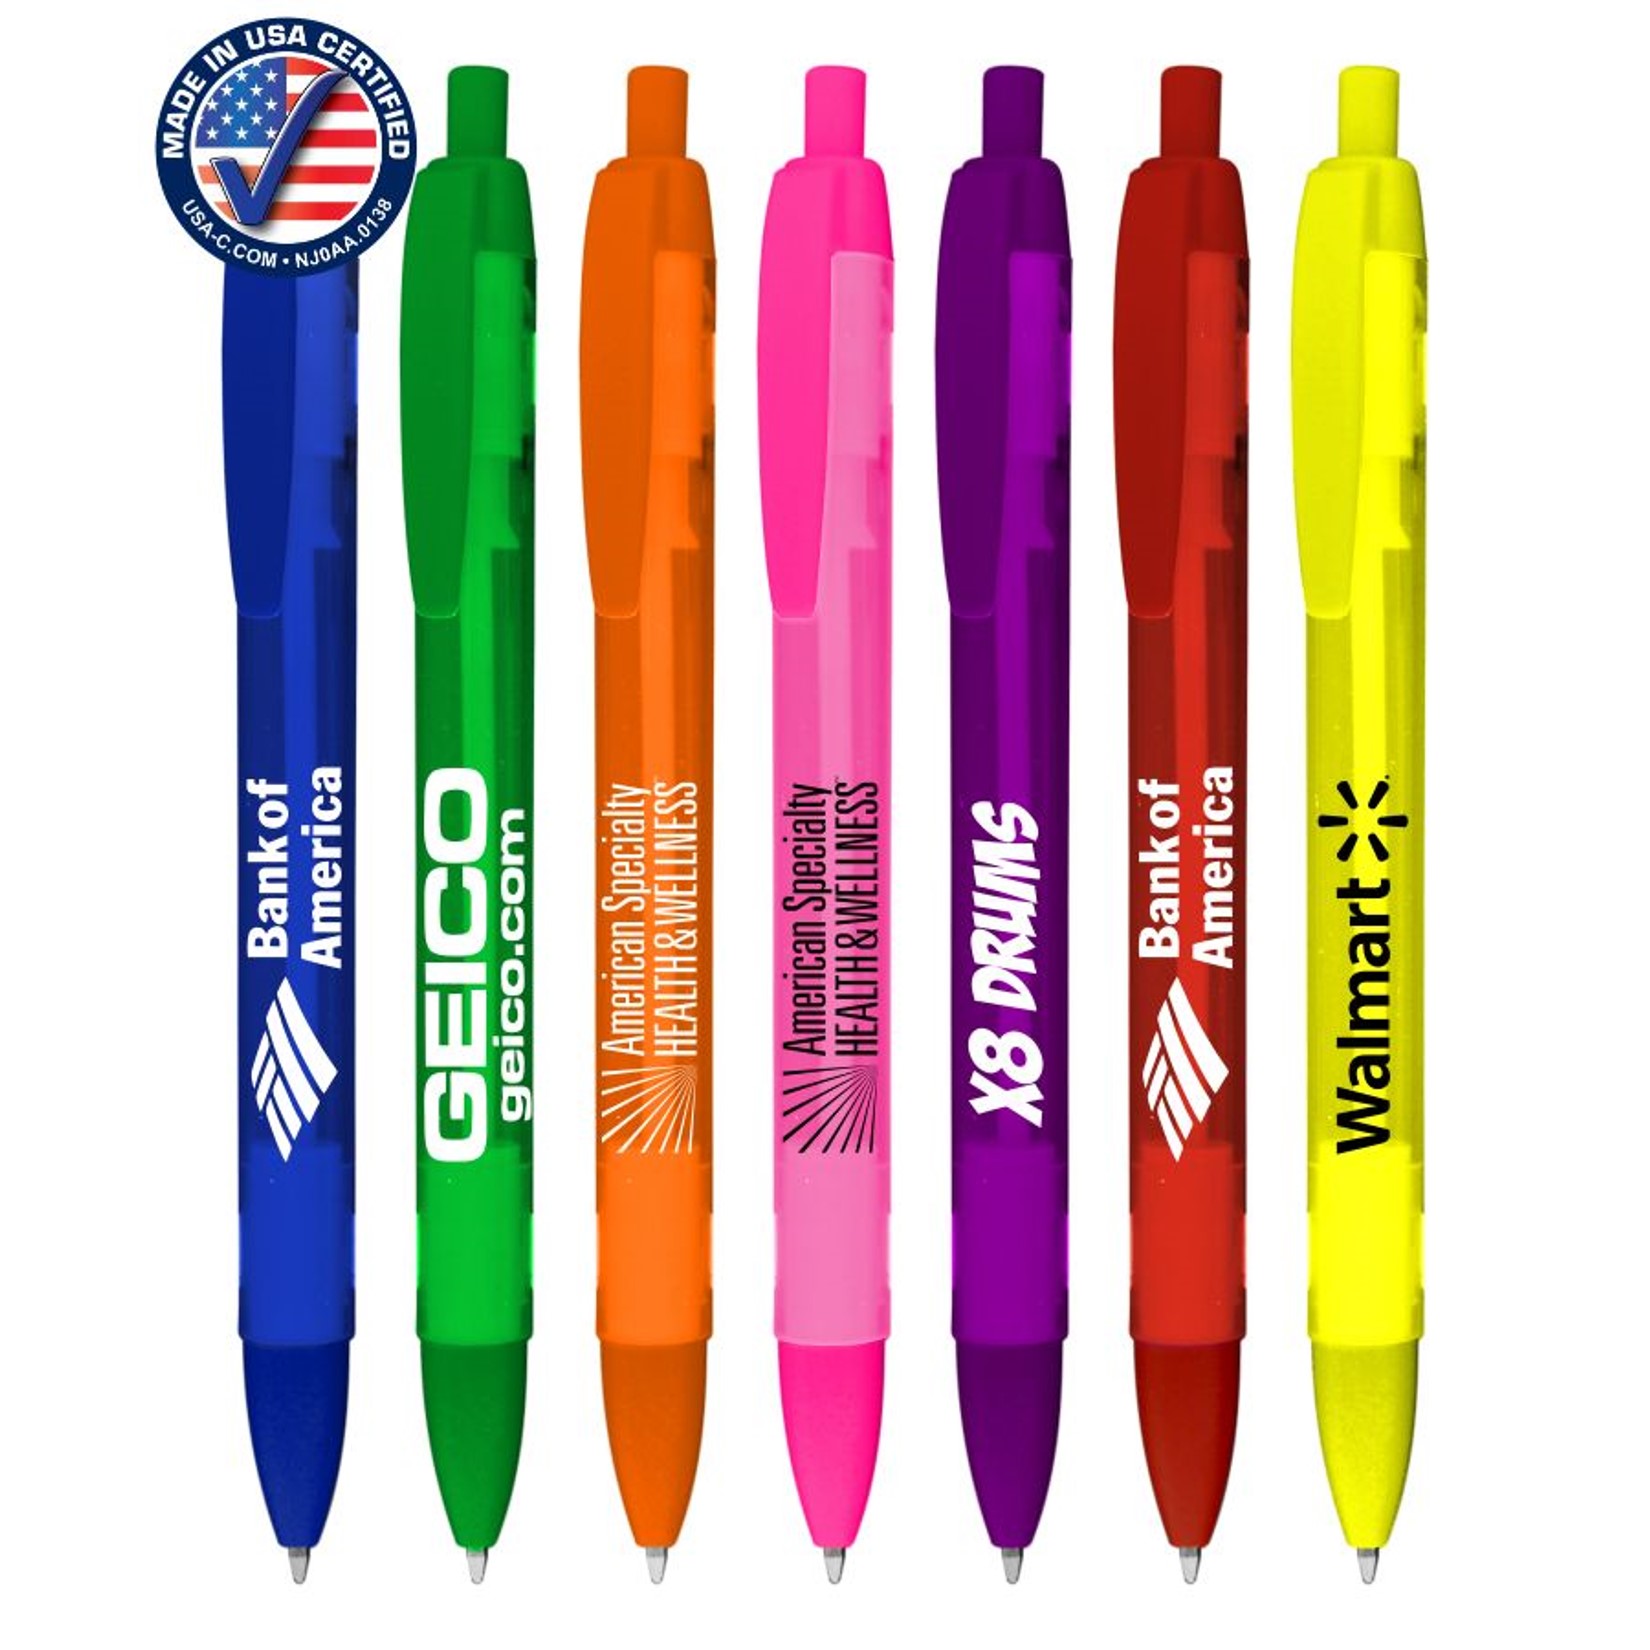 USA made wide body frosted Union Made pen